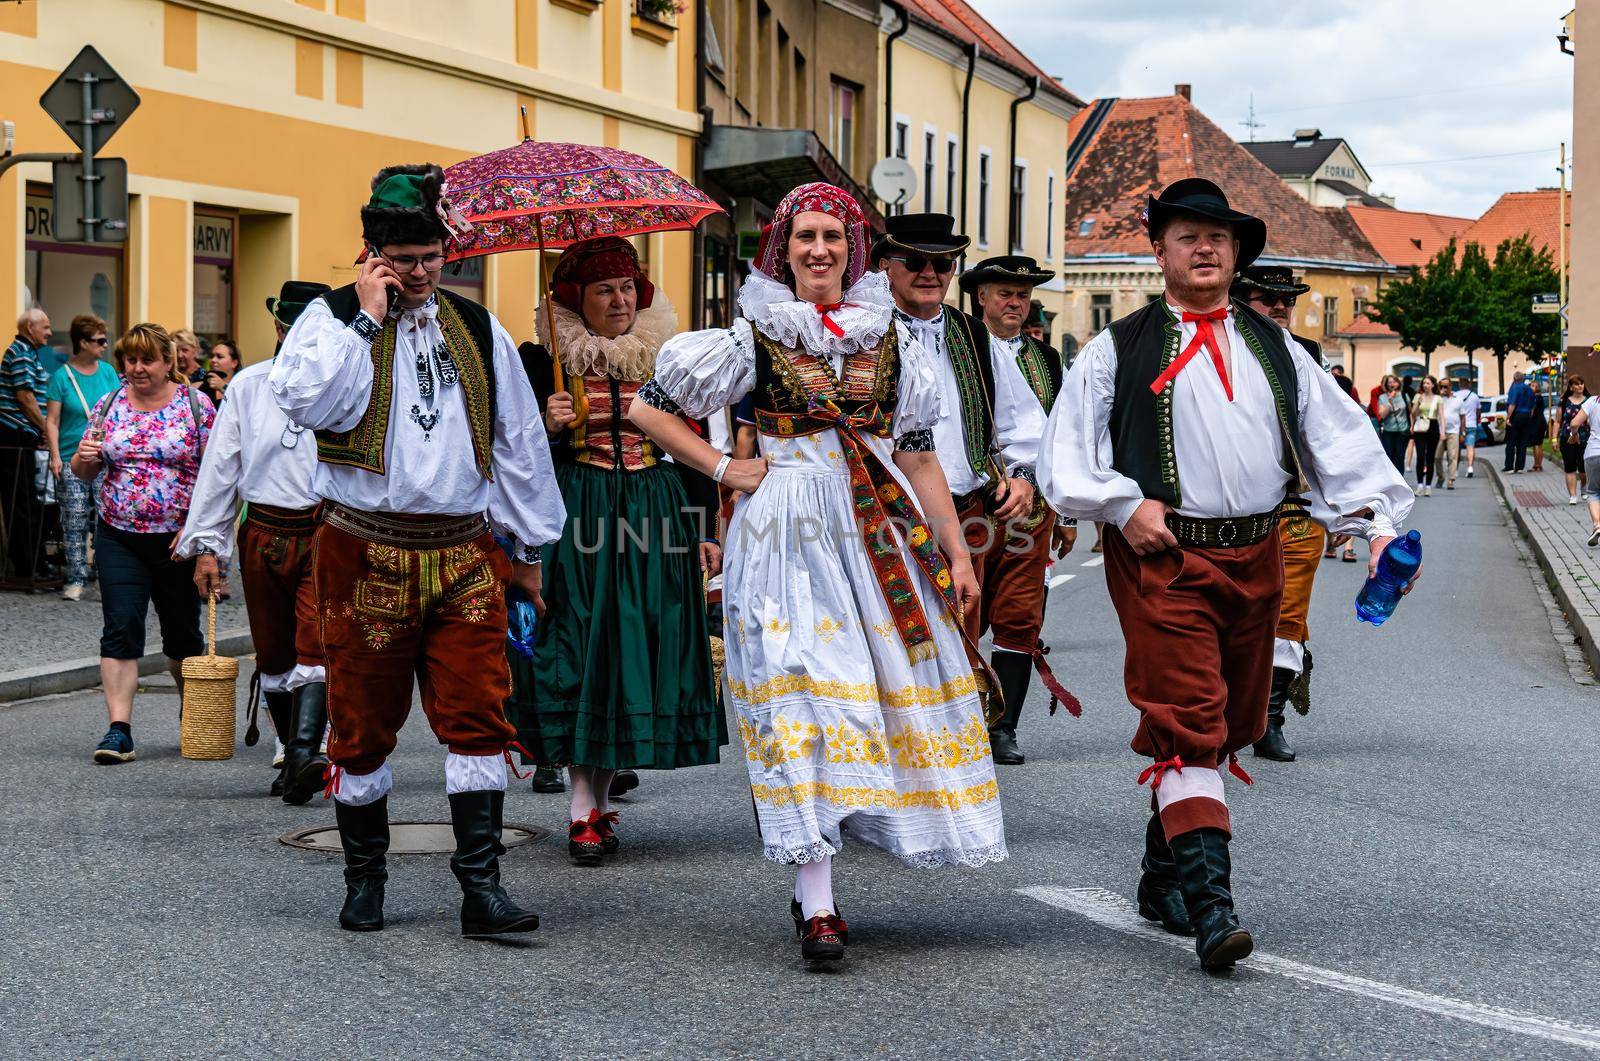 Men and women in folk costumes on the streets of the city by rostik924